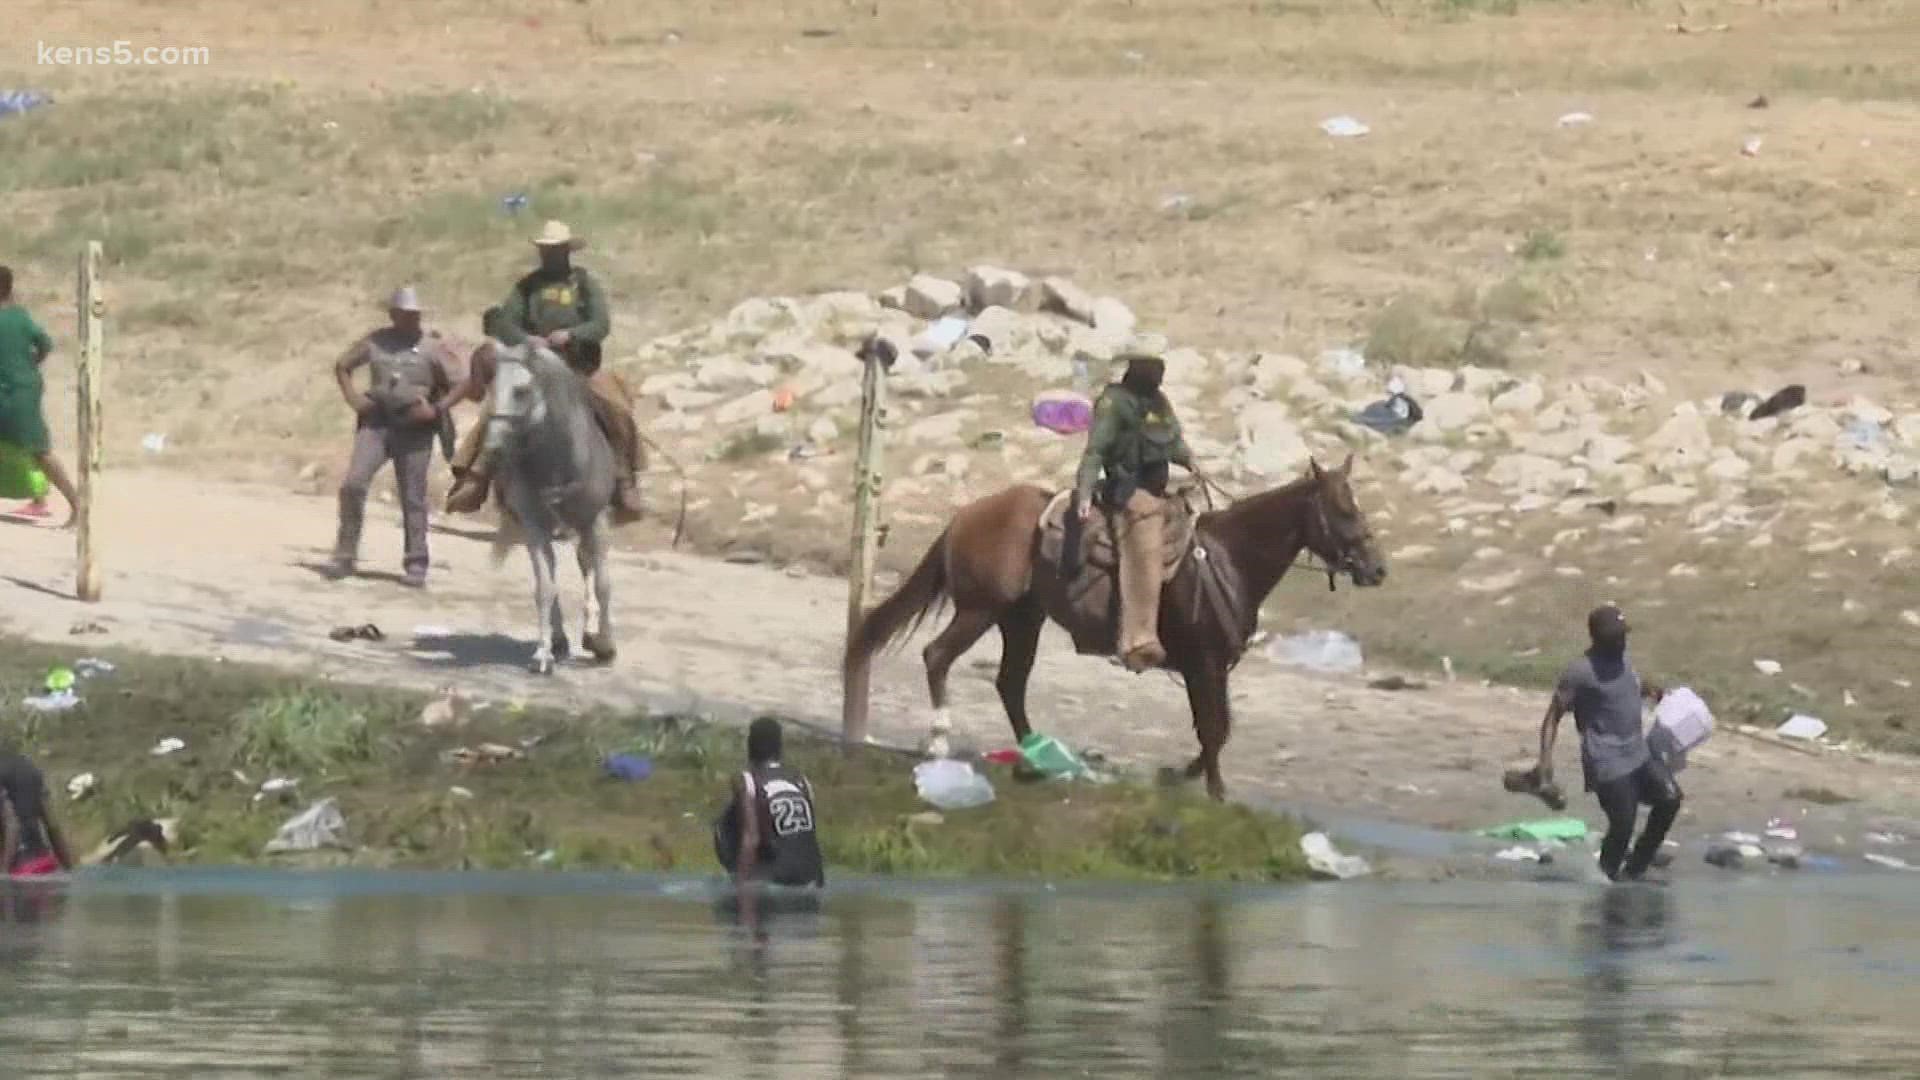 Border Patrol Chief Raul Ortiz said agents regularly use horses to patrol the river, and that the agency would look into what happened.